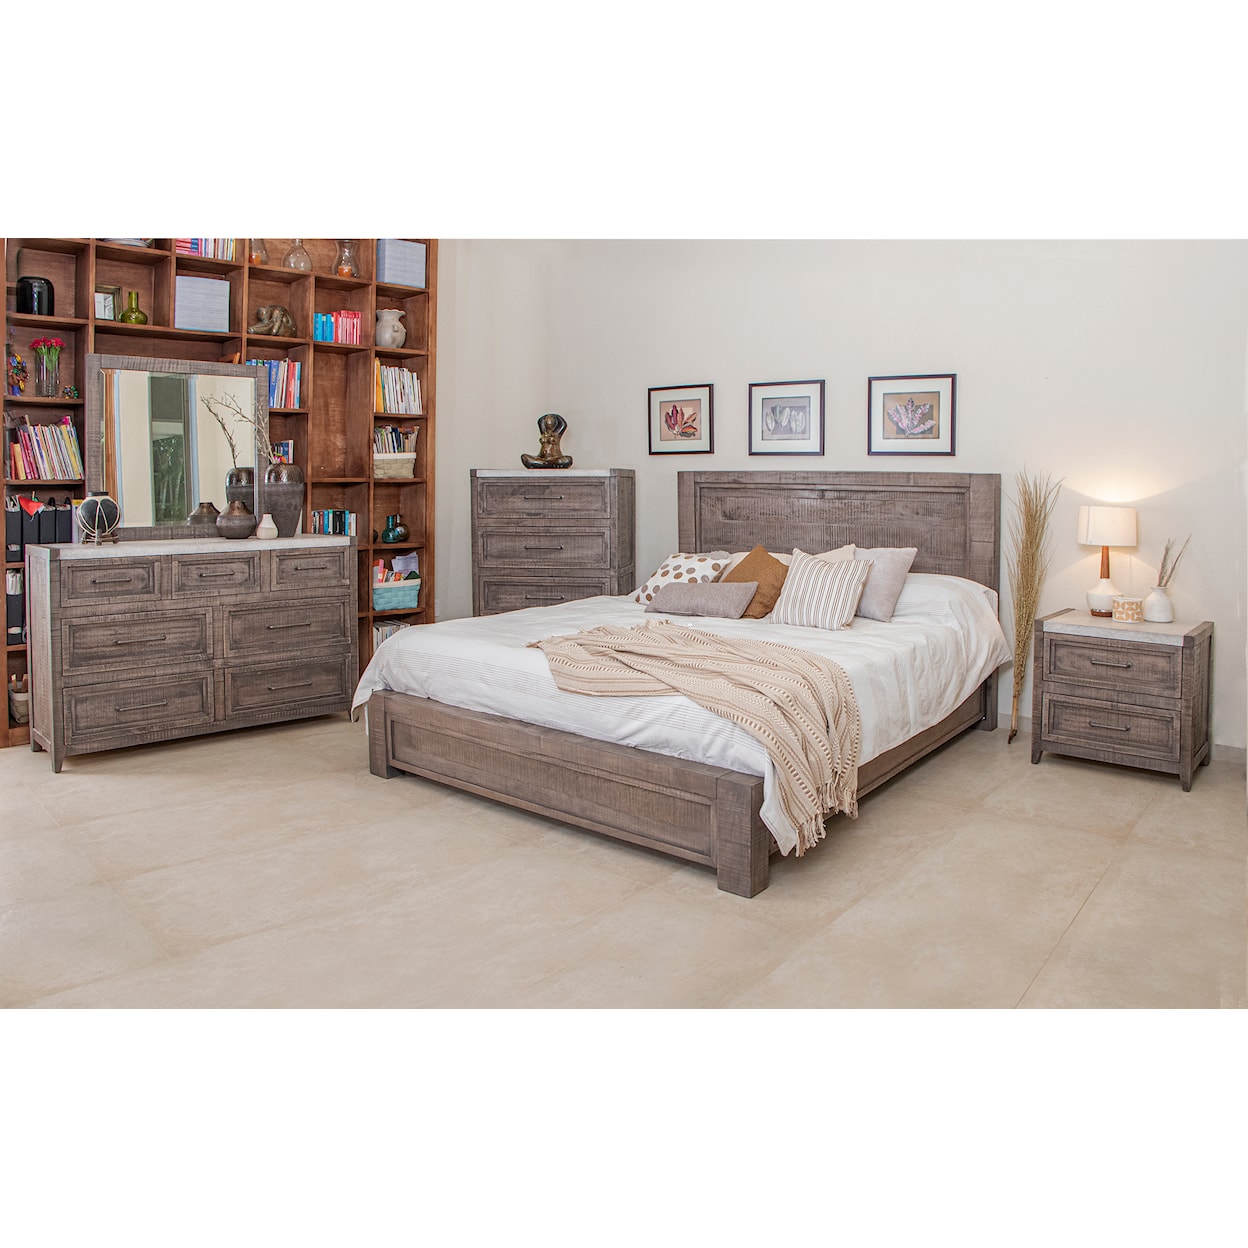 IFD International Furniture Direct Marble Queen Bed